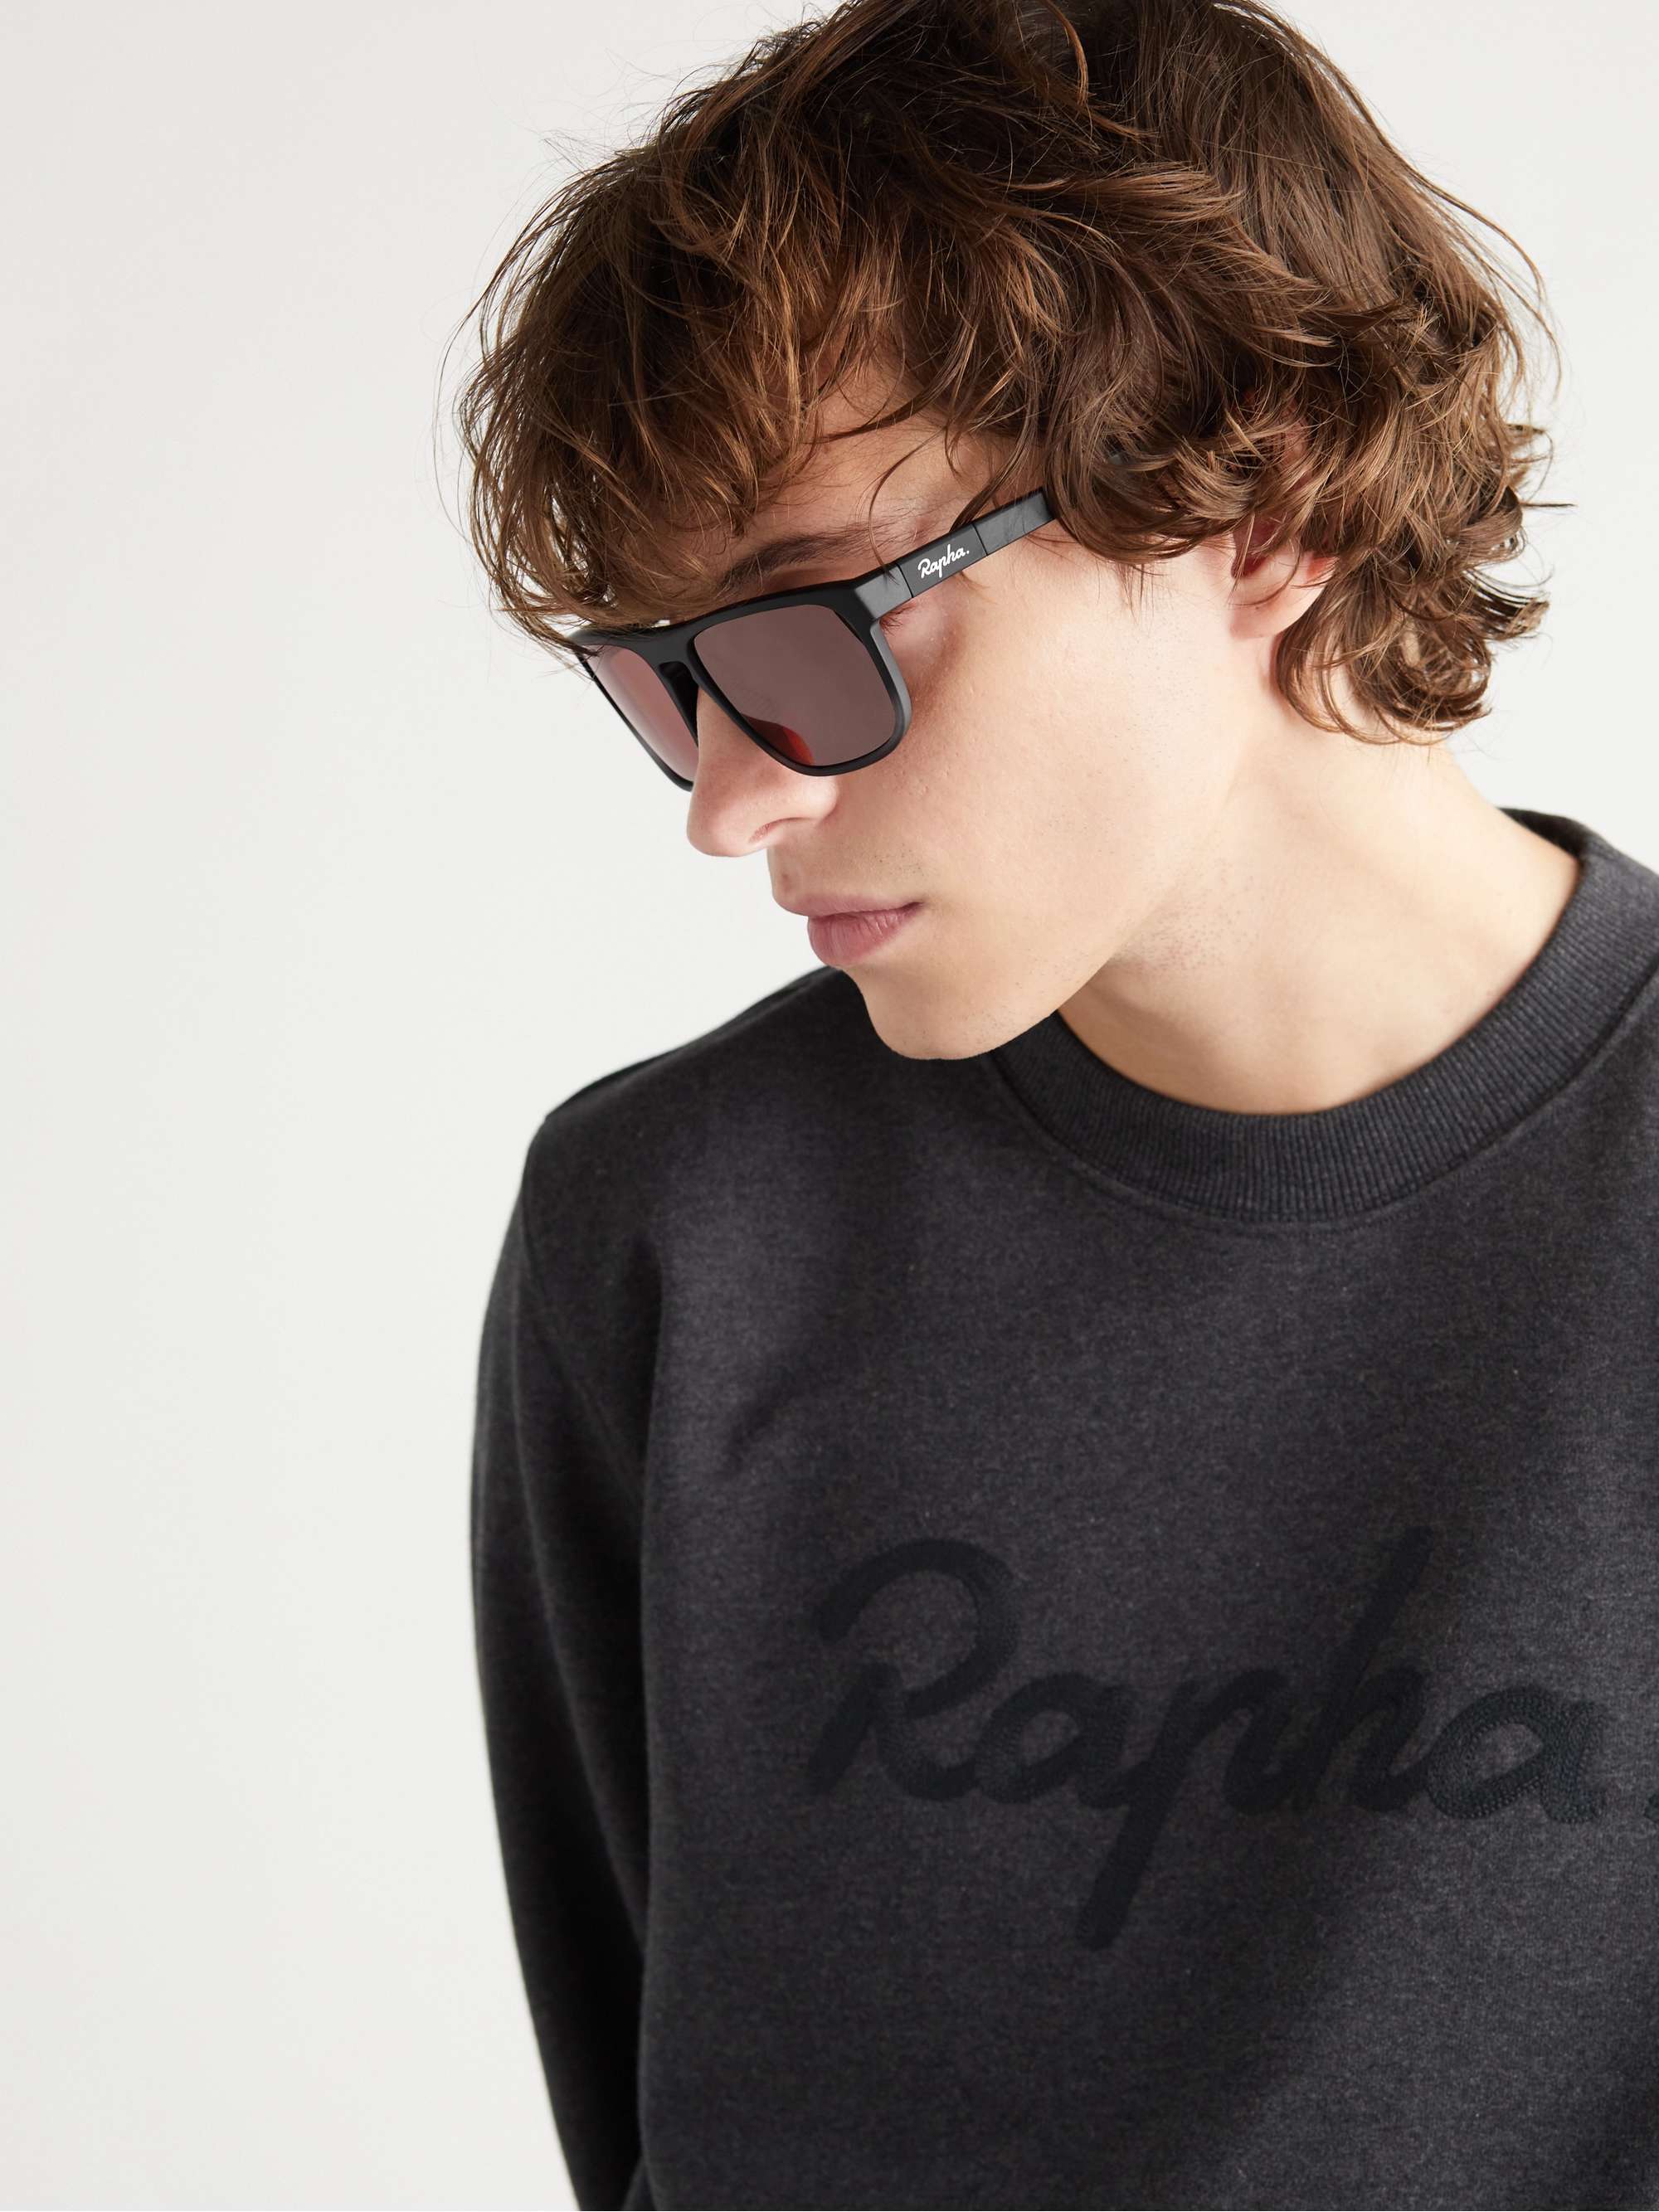 RAPHA Classic Square-Frame Grilamid Cycling Sunglasses